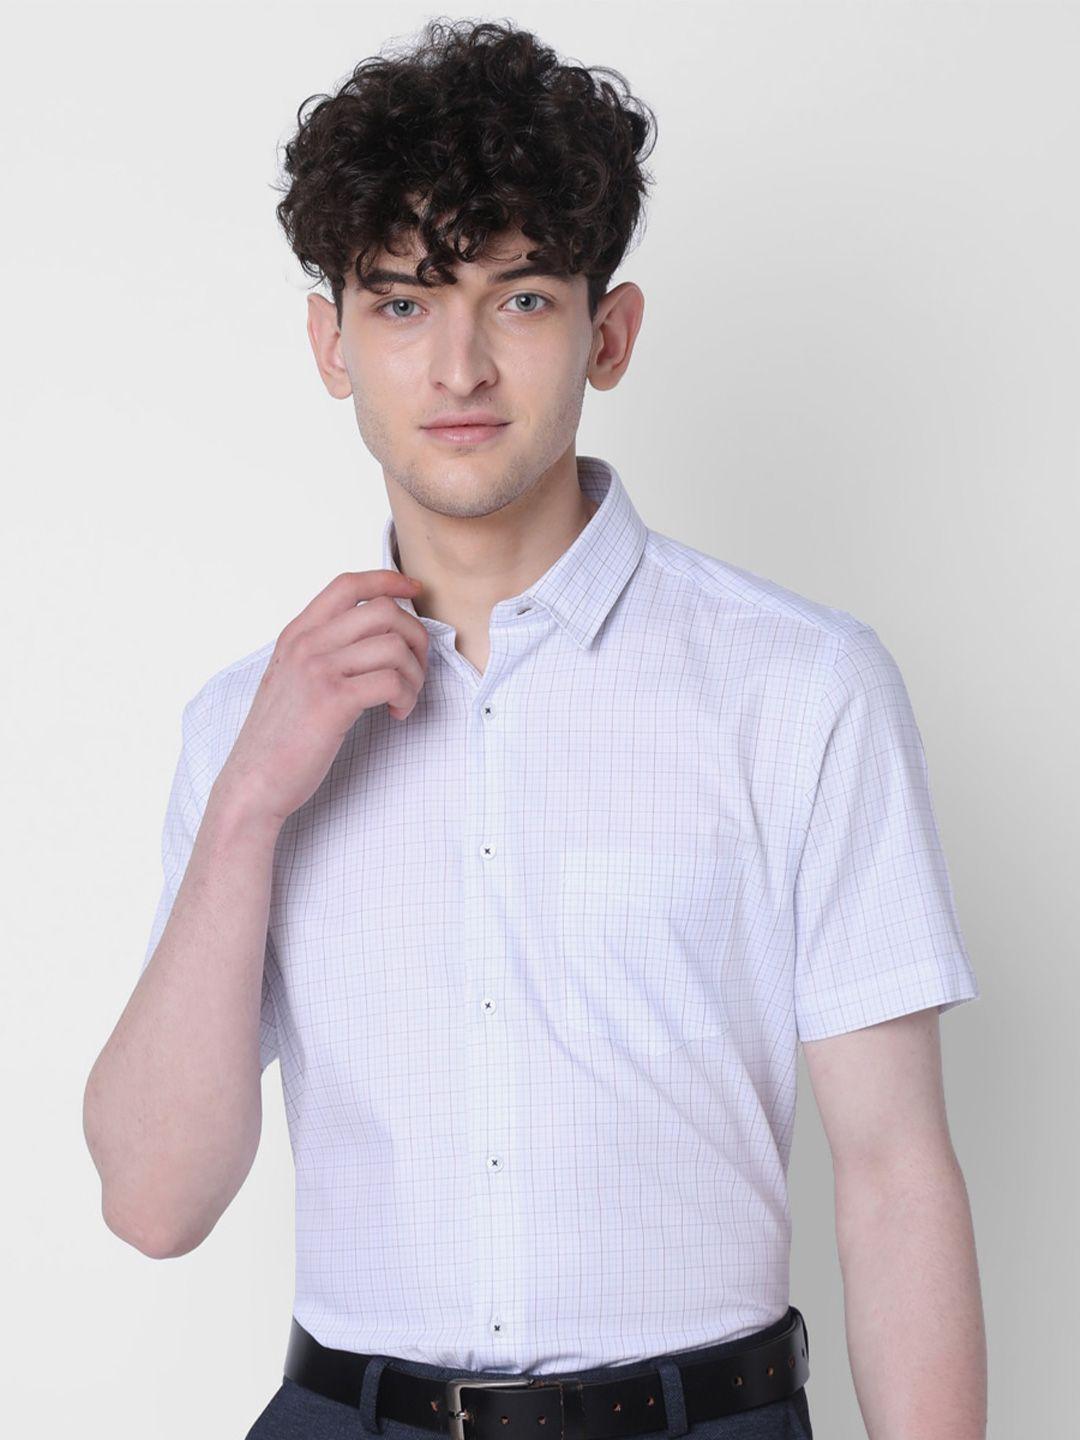 j hampstead classic opaque checked formal shirt